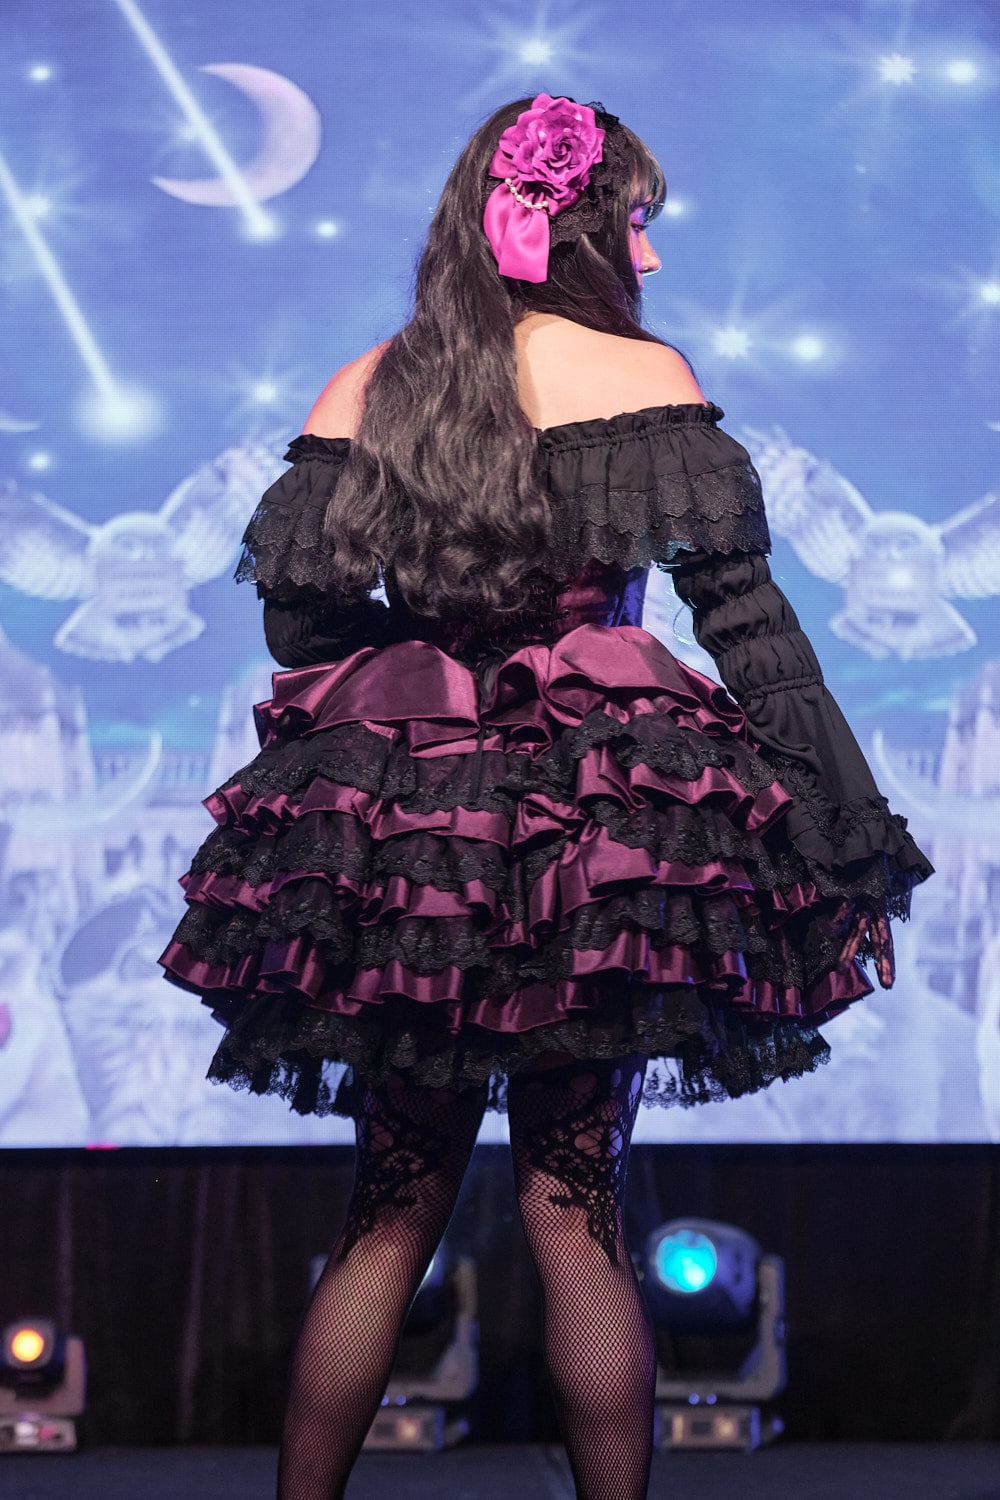 Purple and black gothic lolita outfit - backside.